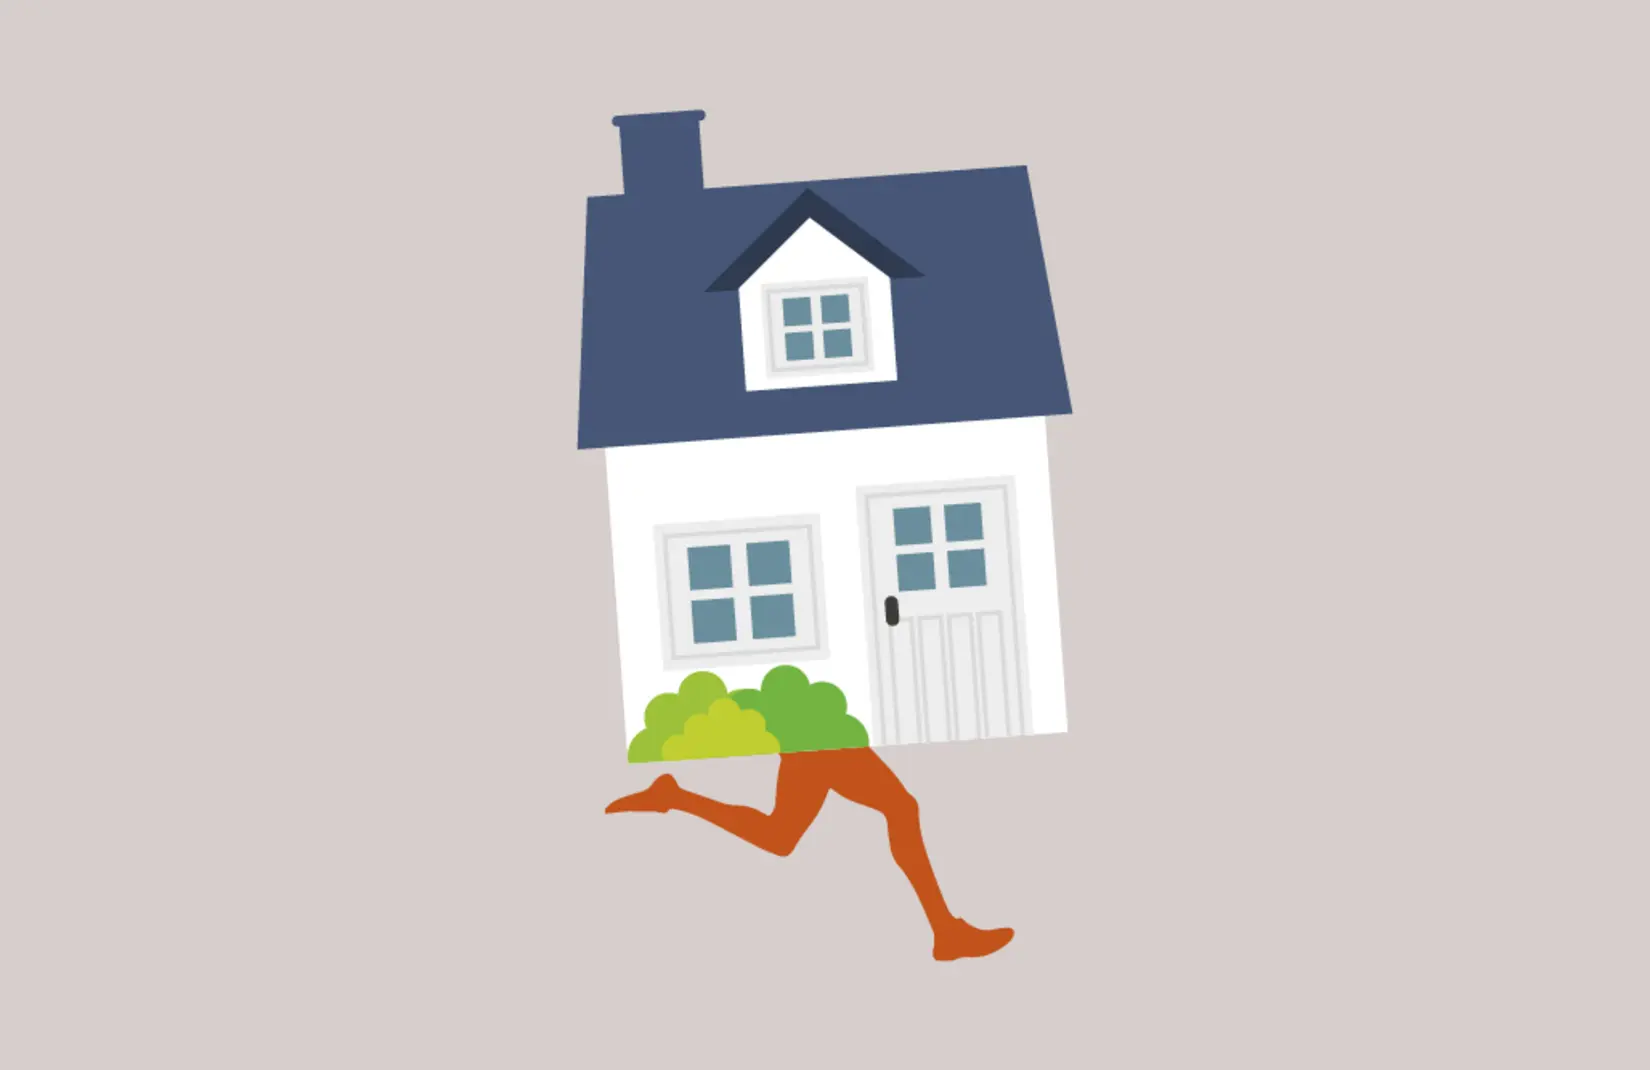 Visualization of a house with 2 legs running away.